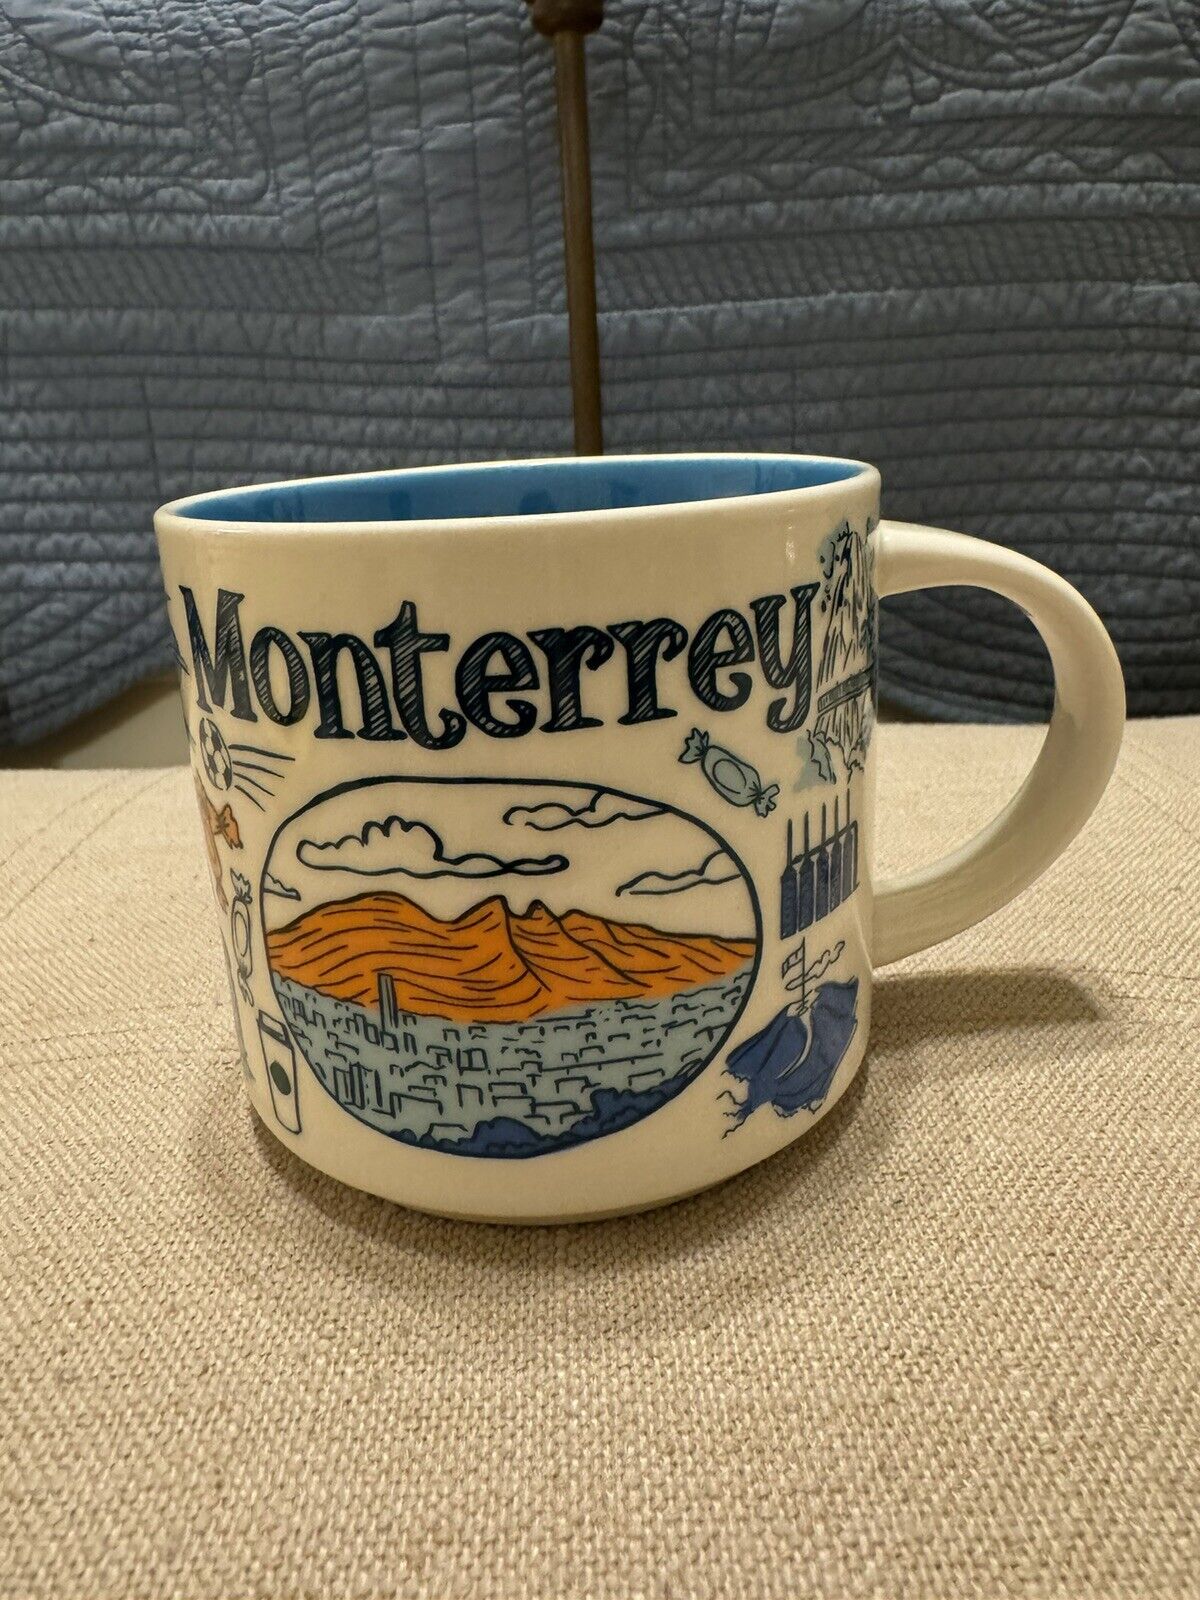 Starbucks Been There Series Monterrey Mexico Coffee Mug 14 Ounce 2018 Collector